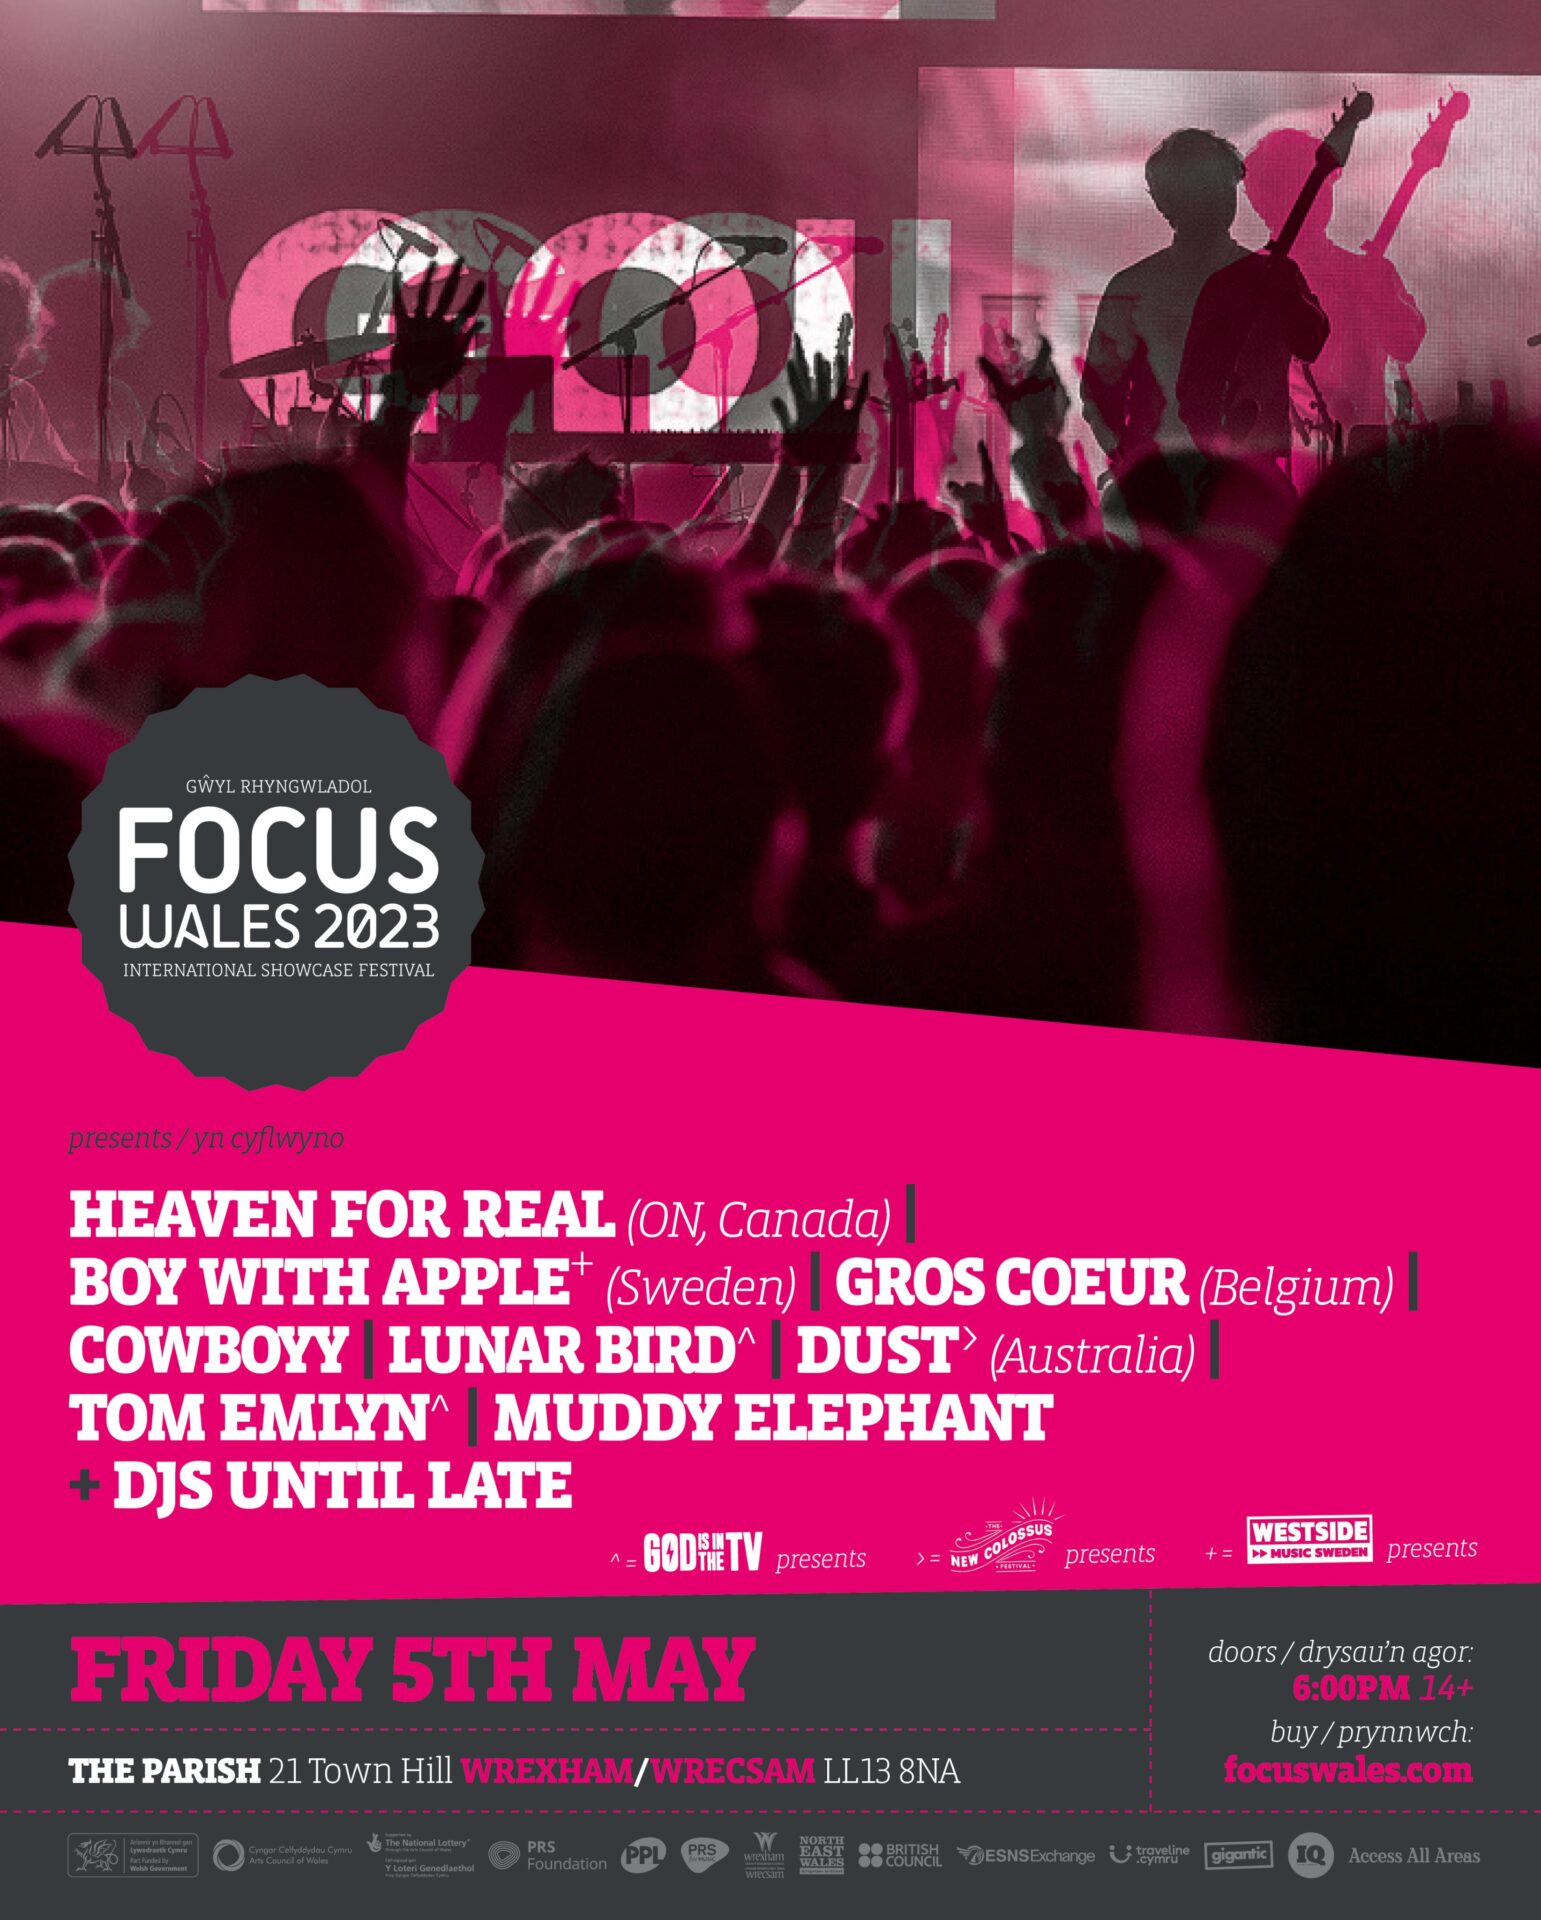 NEWS: Lunar Bird and Tom Emlyn are GIITTV showcase artists performing at Focus Wales on the 5th May 2